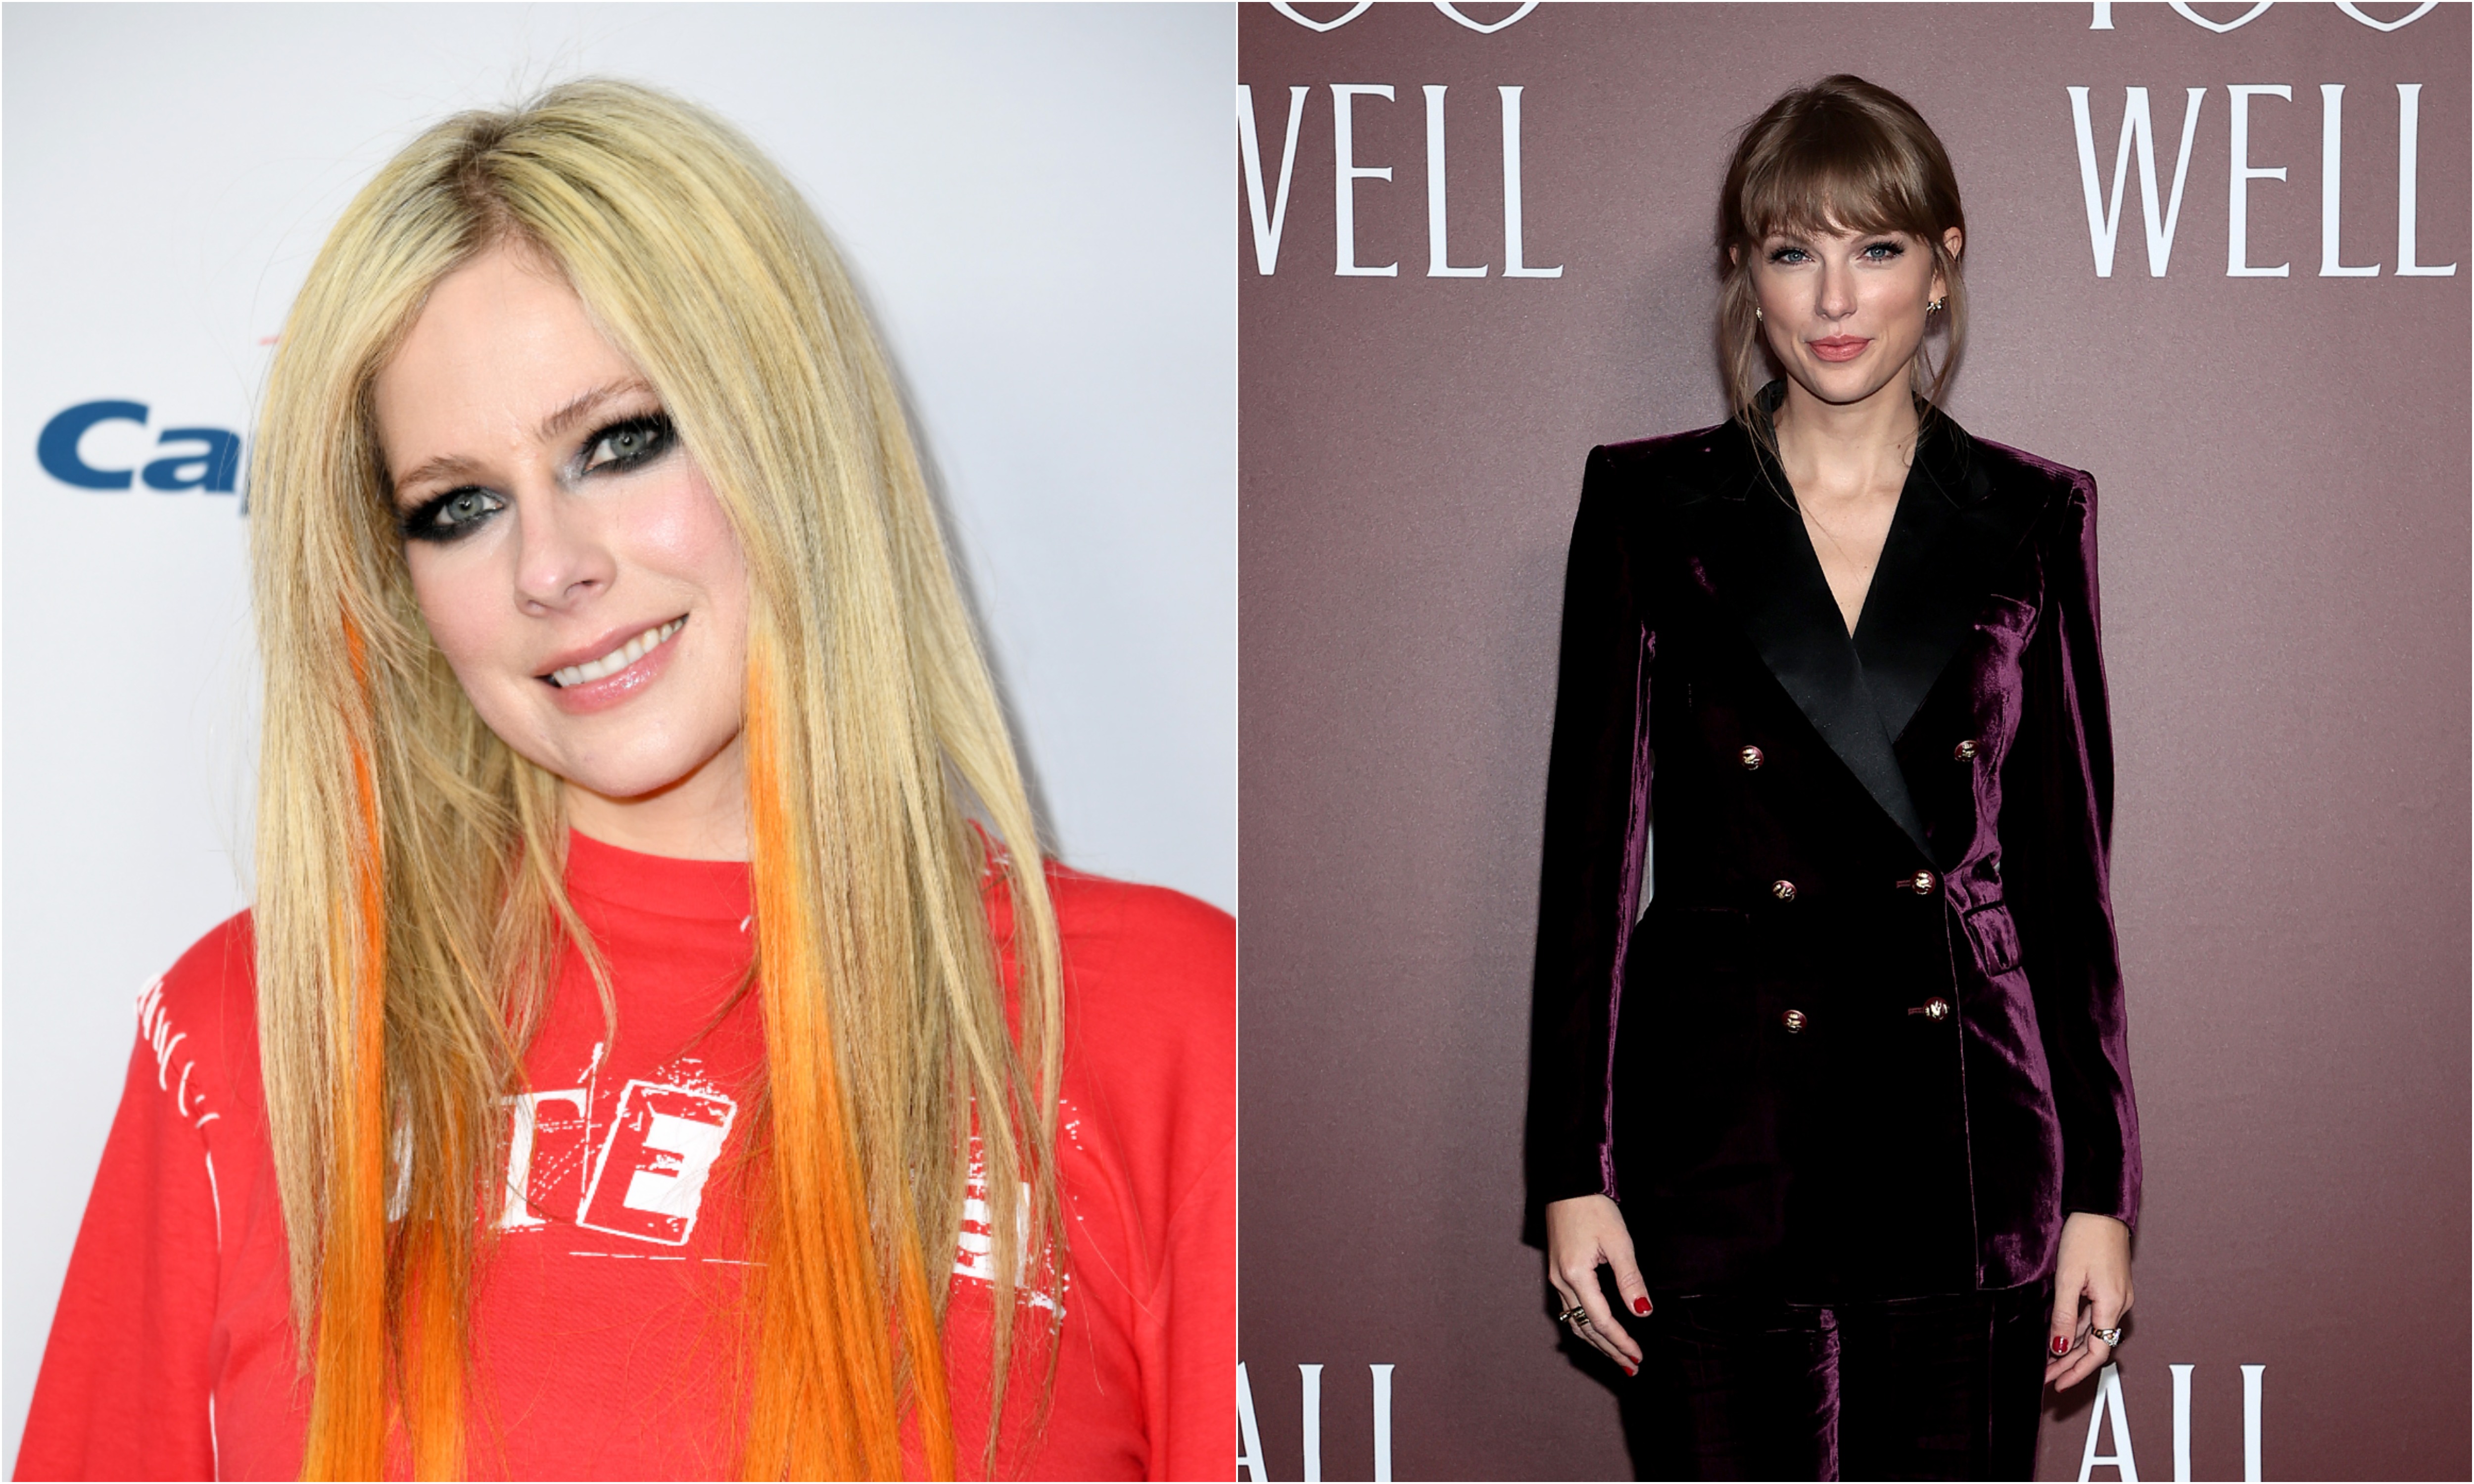 A joined photo of Avril Lavigne and Taylor Swift